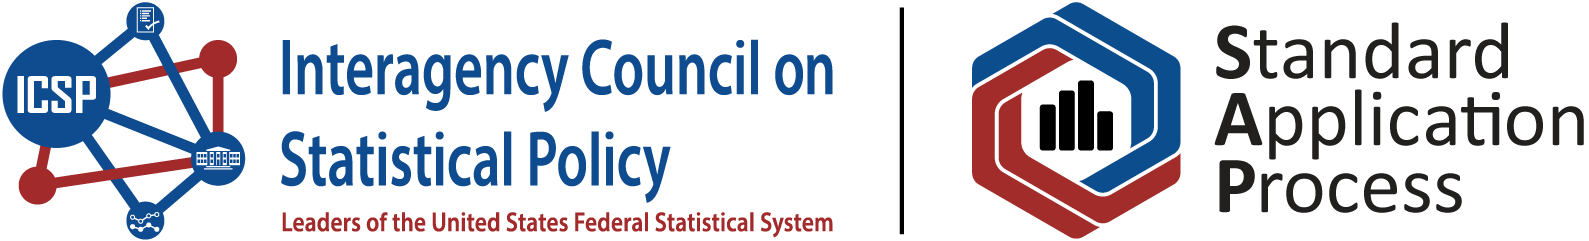 Interagency Council on Statistical Policy - Standard Application Process